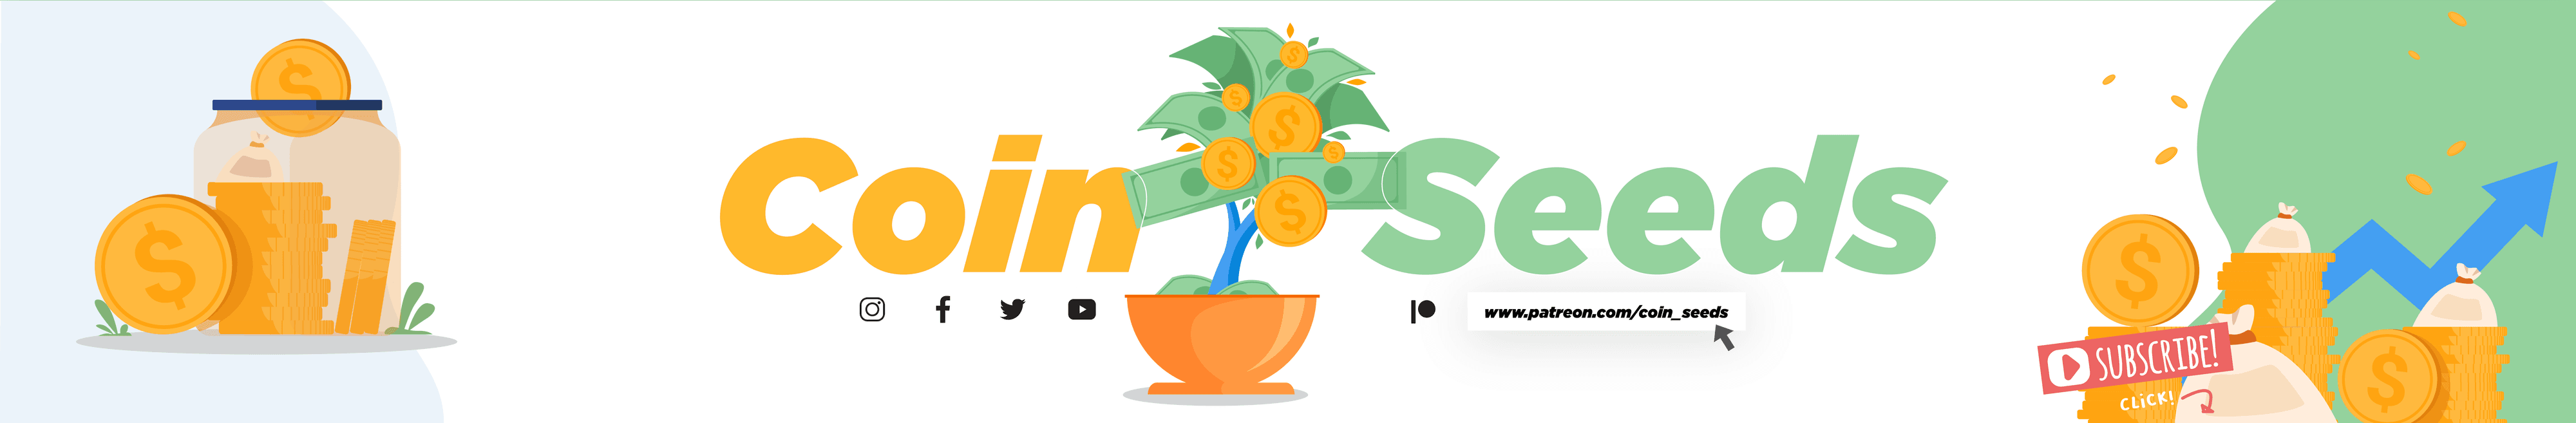 Coin-Seeds banner